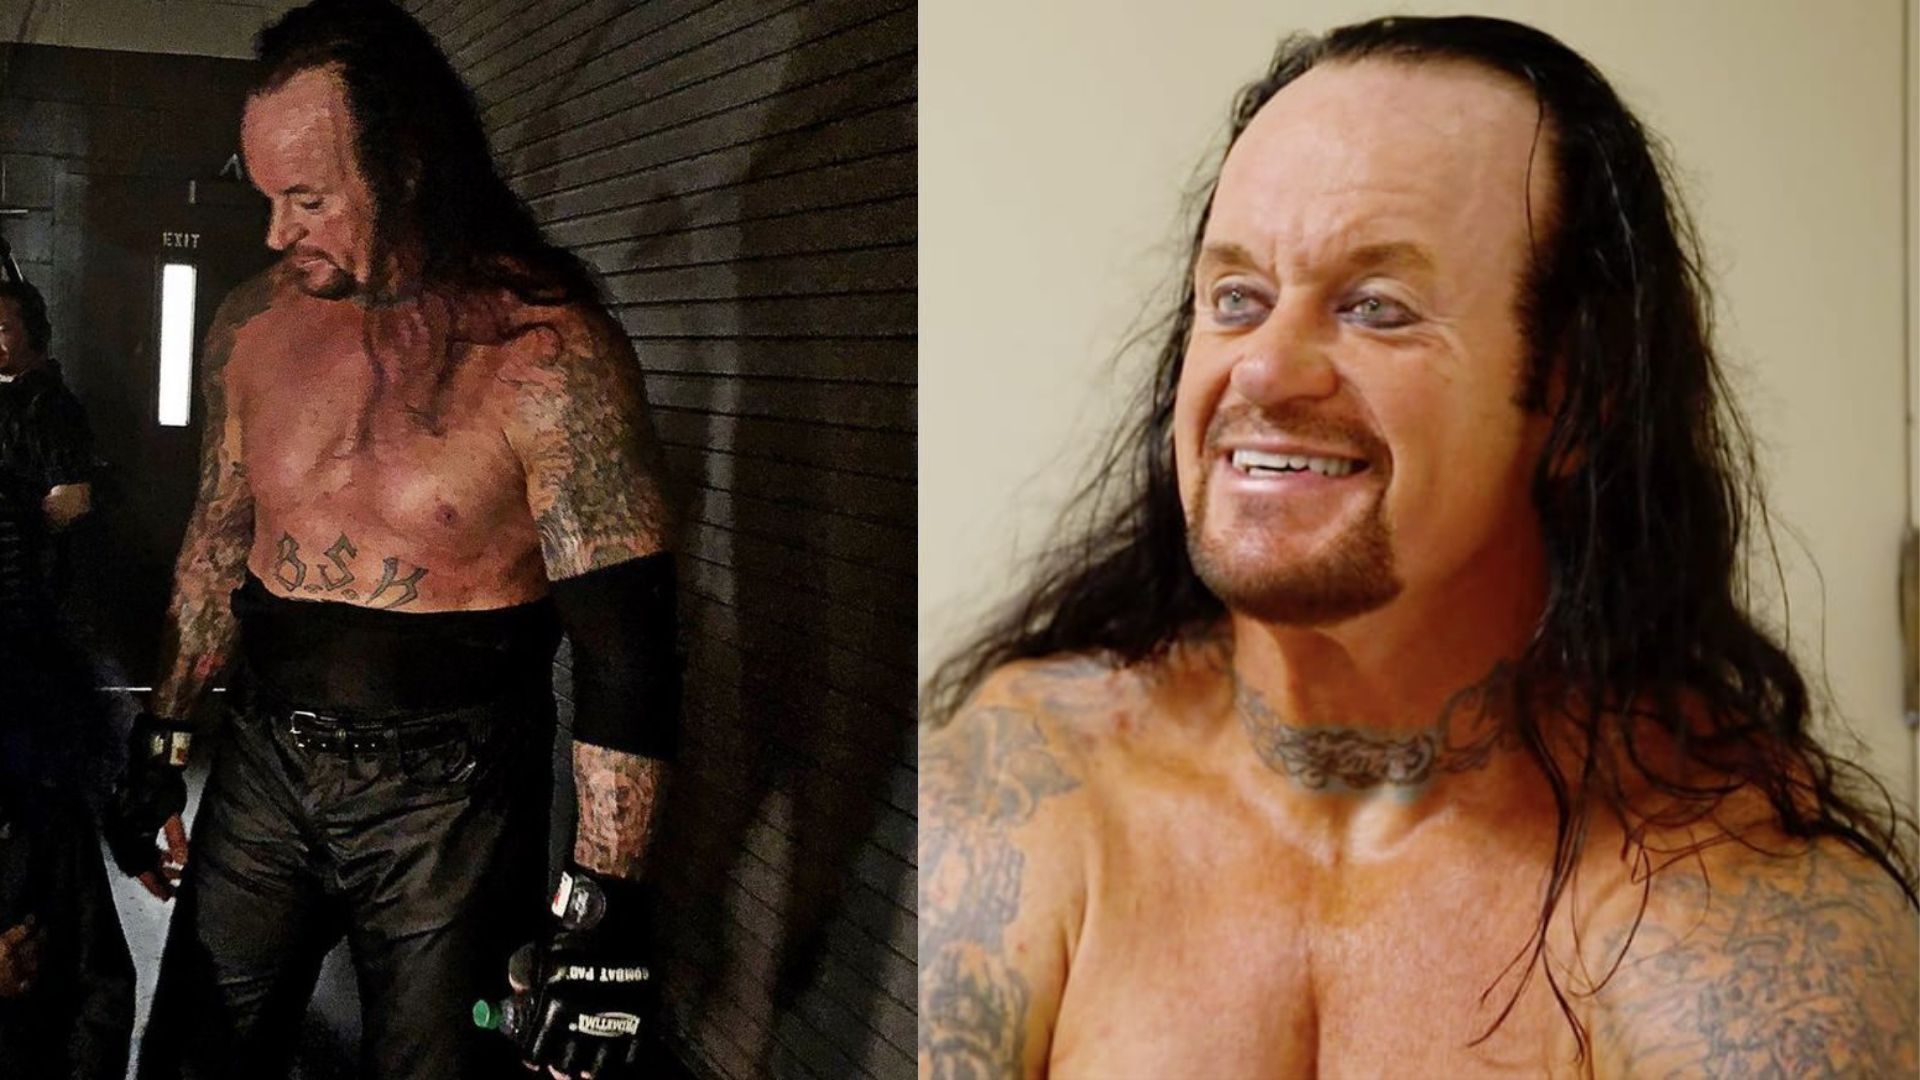 The Undertaker is a WWE Hall of Famer